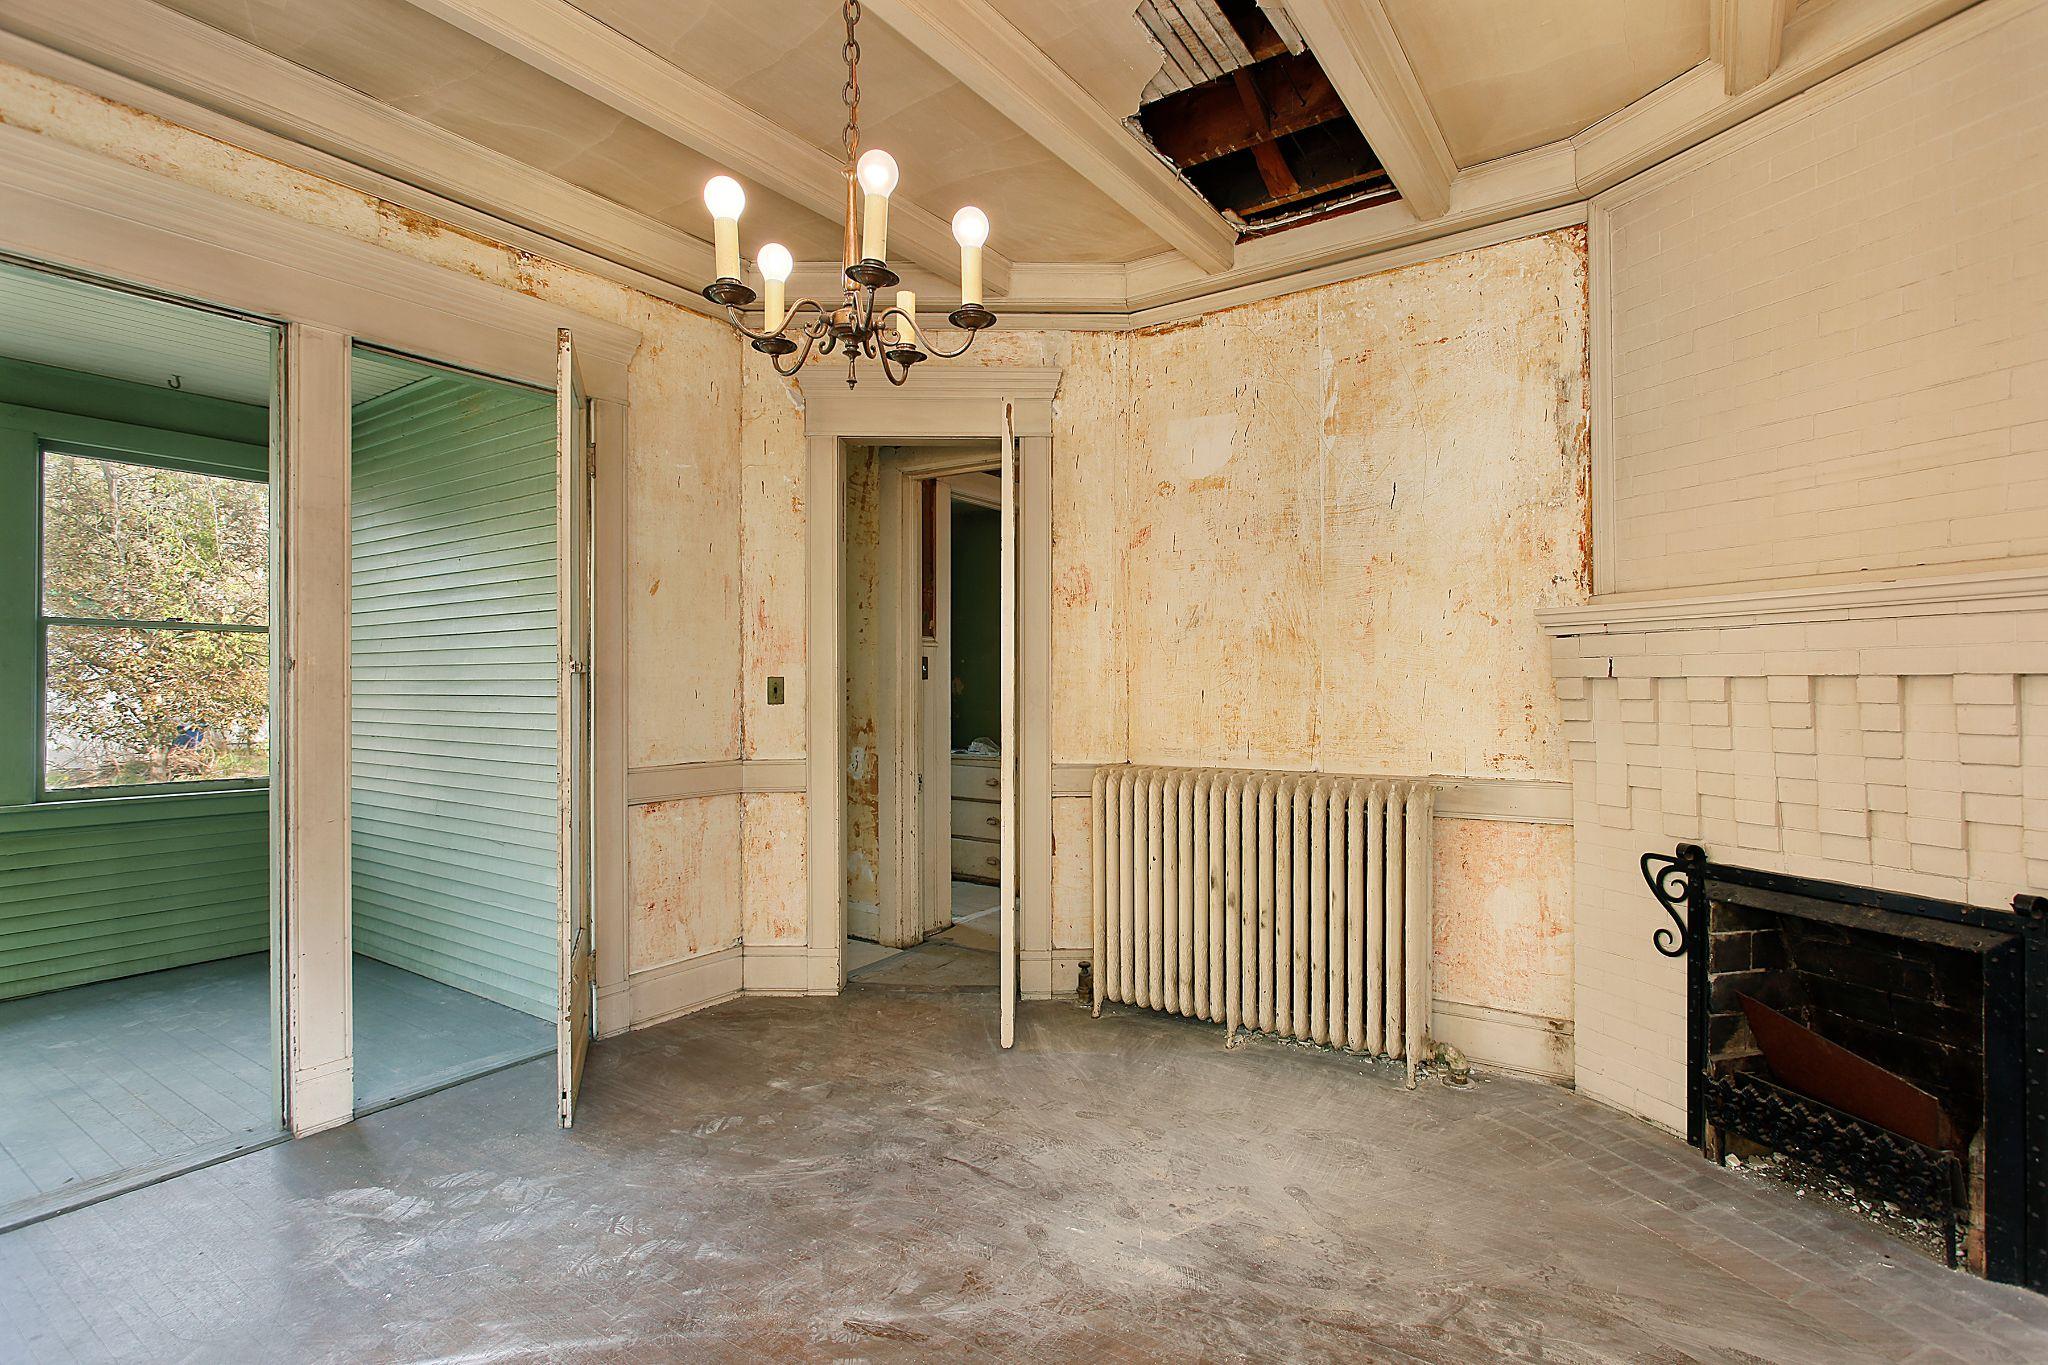 dining-room-with-peeling-paint-in-old-abandoned-home